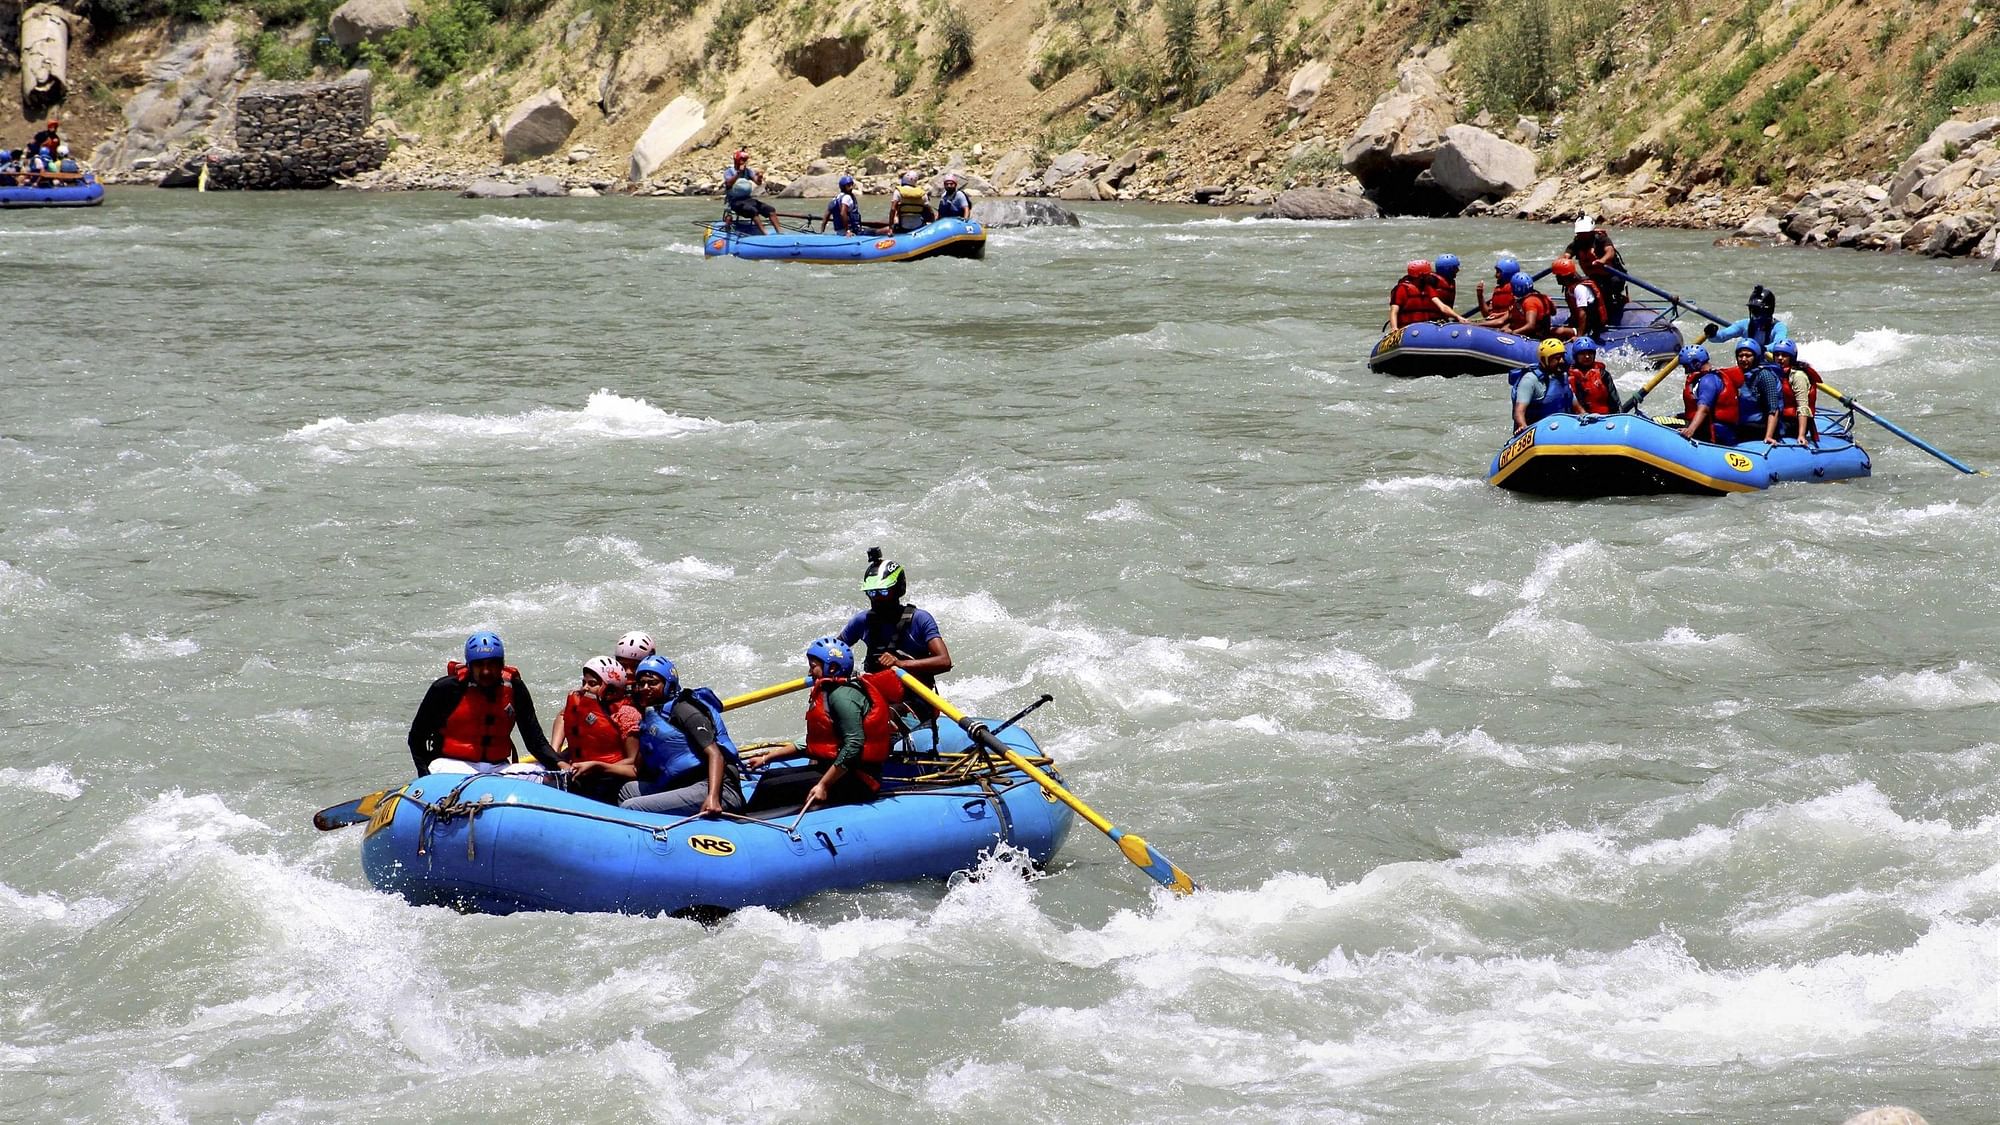 <div class="paragraphs"><p>Manali: Tourists taking part in water sport activities in Beas river in Manali on 2 July.</p></div>